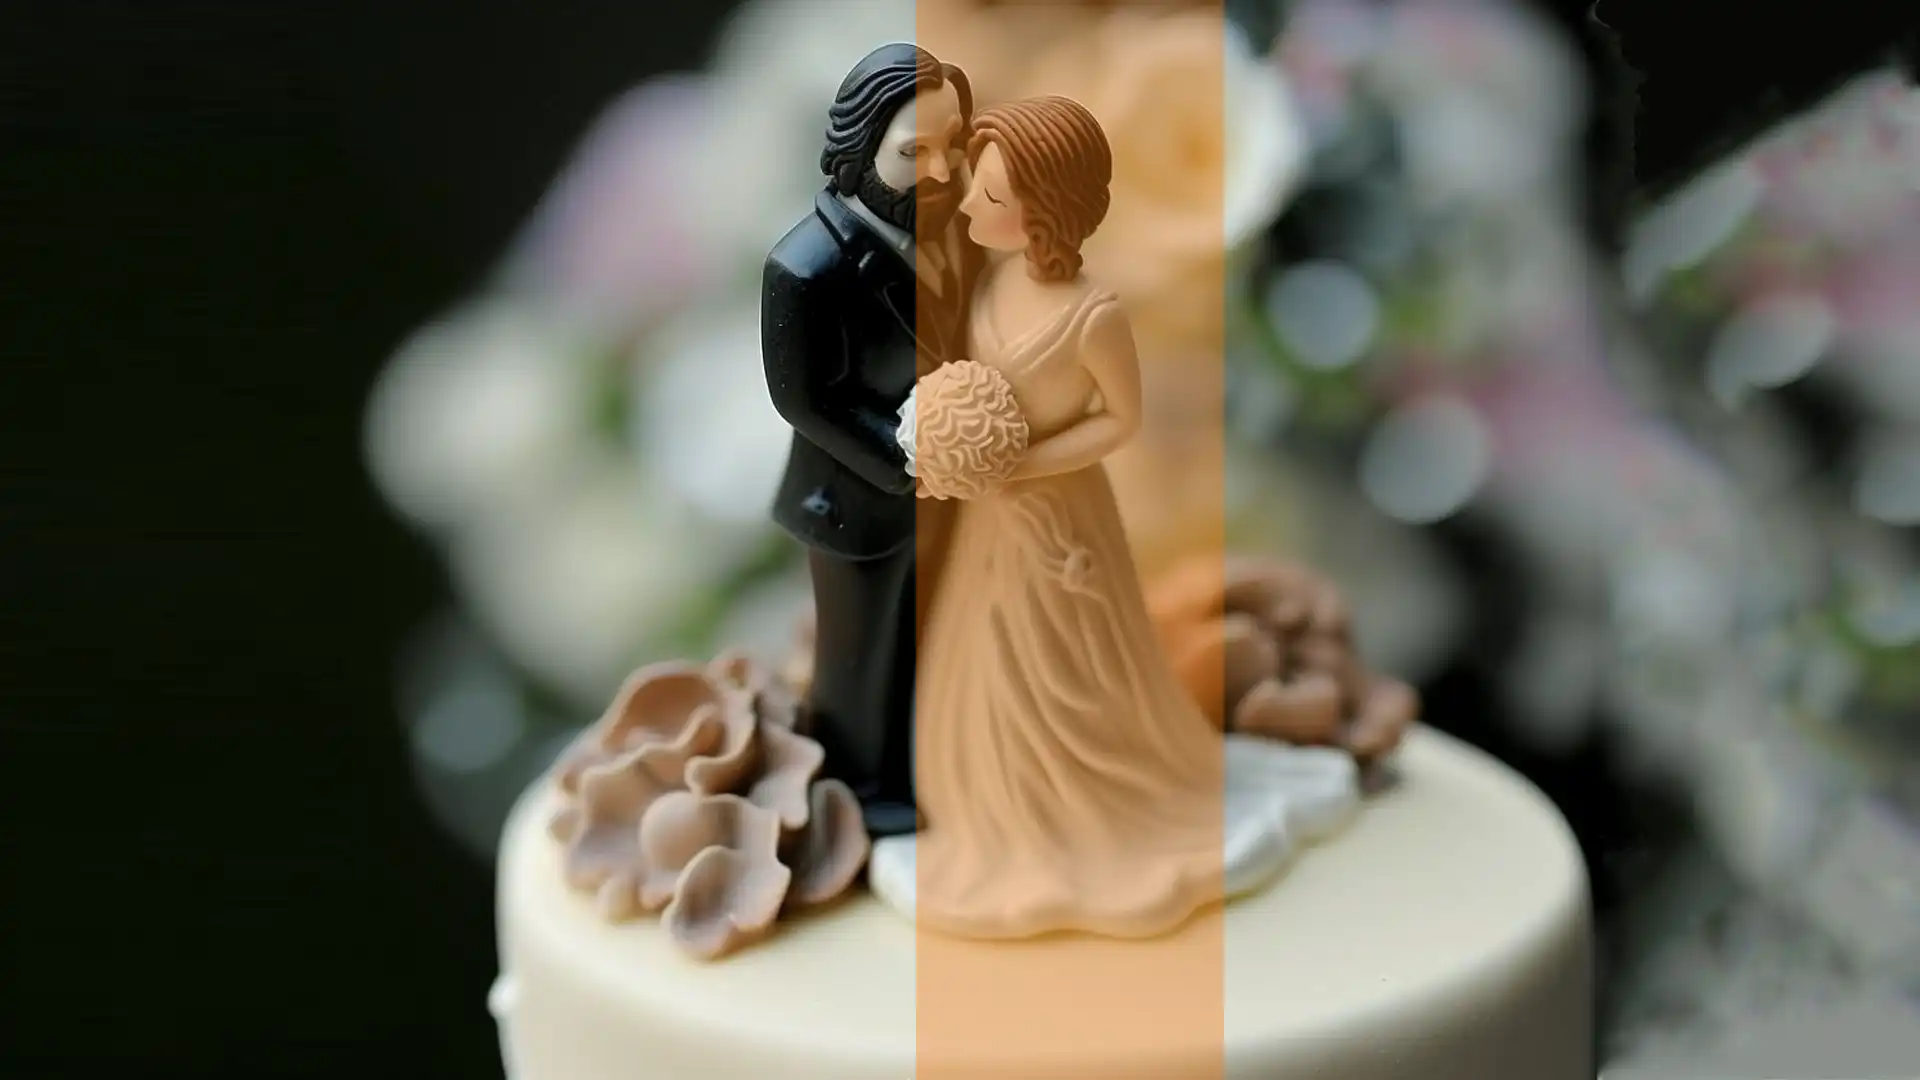 link to infidelity investigations using a thumbnail photo of a wedding cake topper depicting a bride and groom